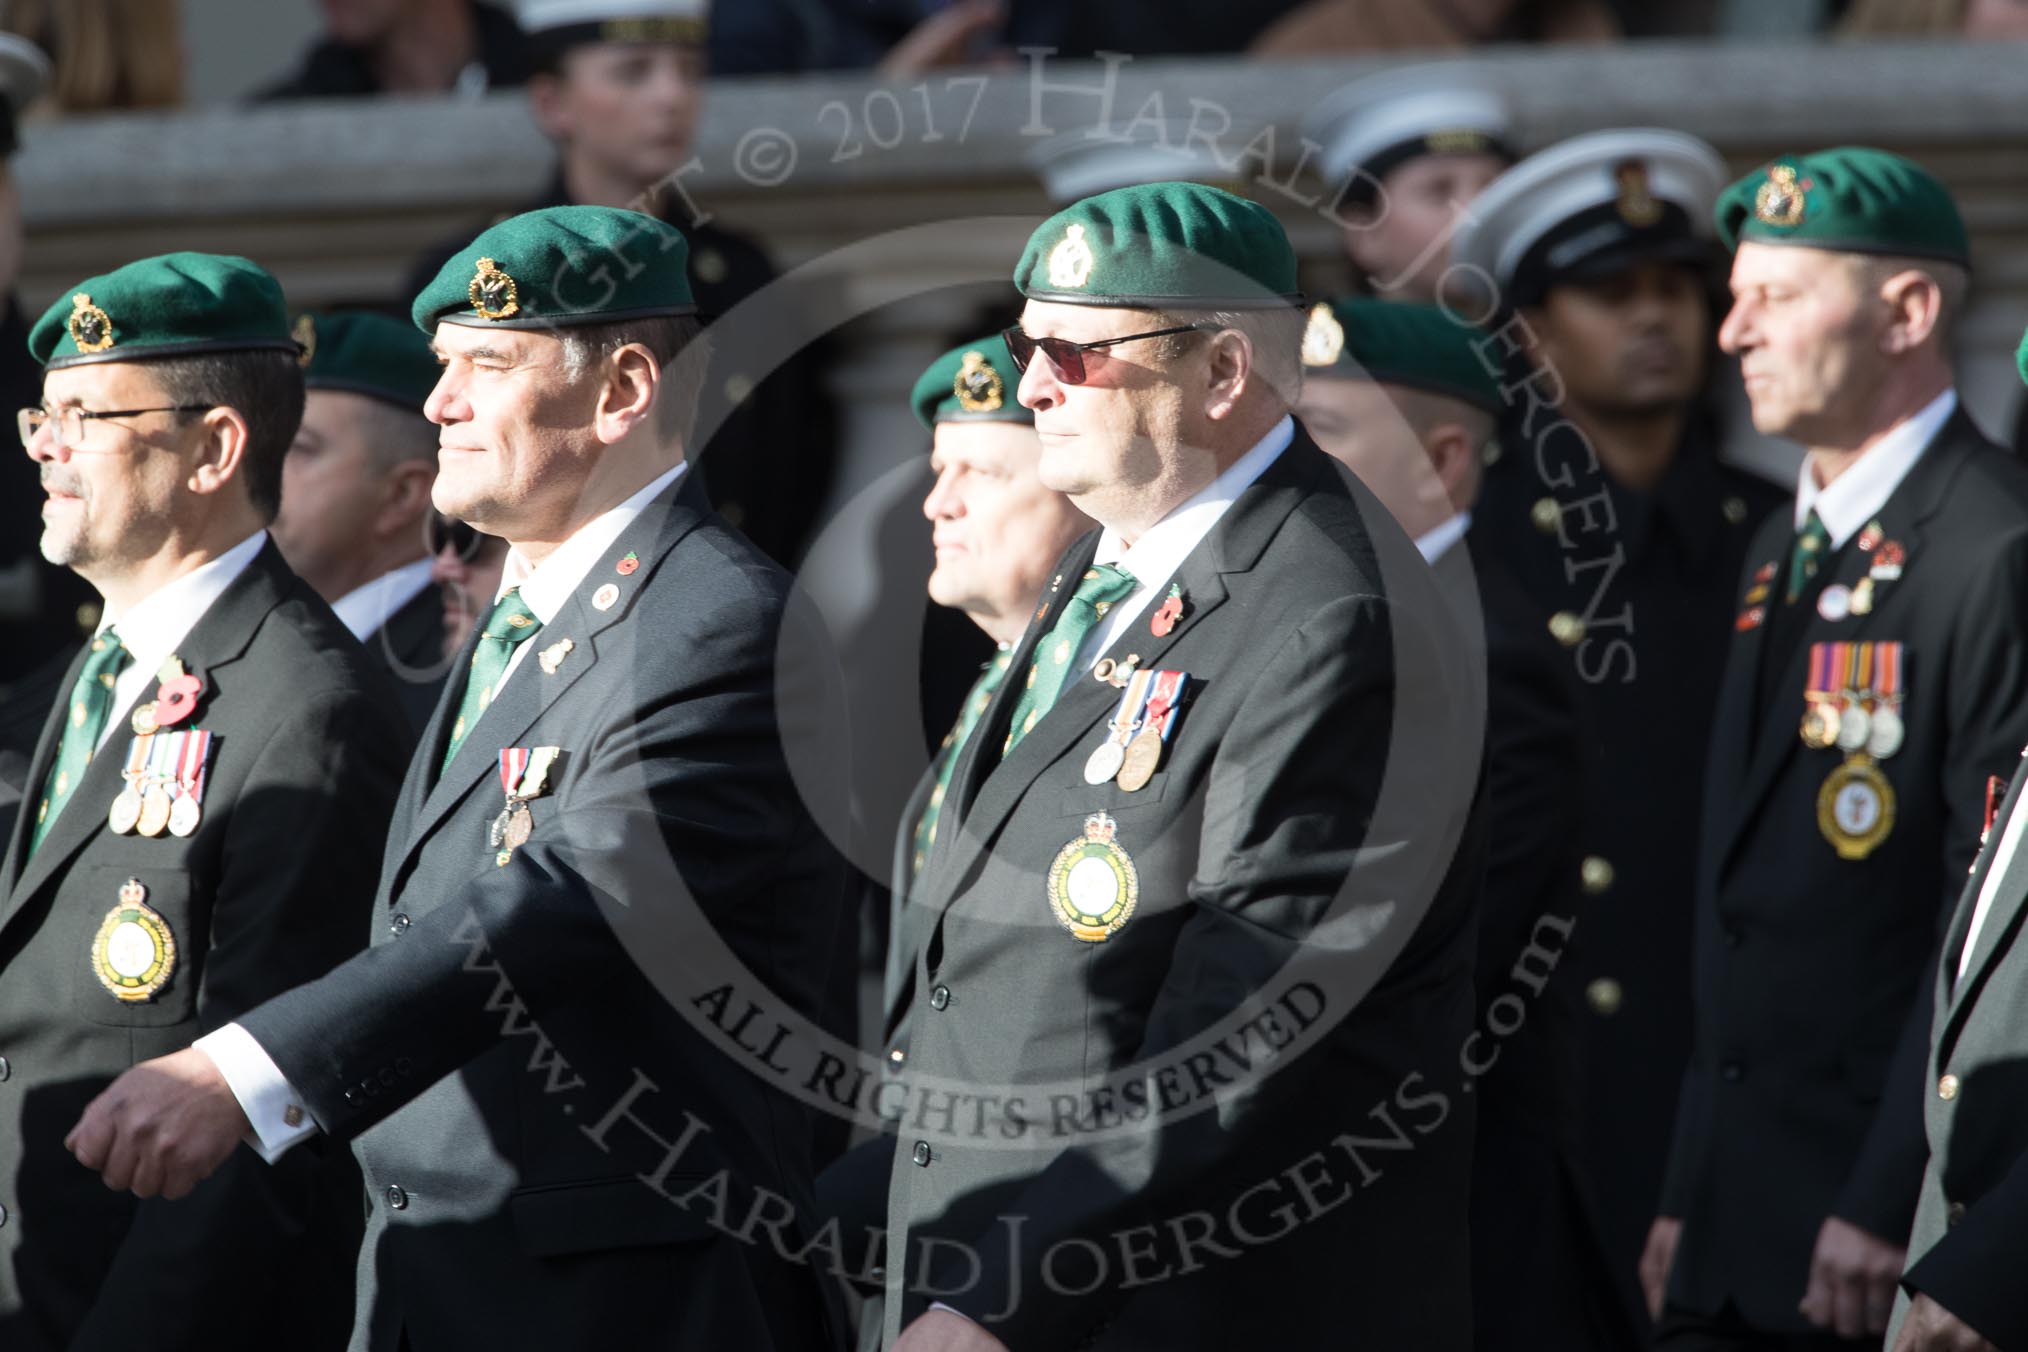 The South African Legion (Group D??) during the Royal British Legion March Past on Remembrance Sunday at the Cenotaph, Whitehall, Westminster, London, 11 November 2018, 12:23.